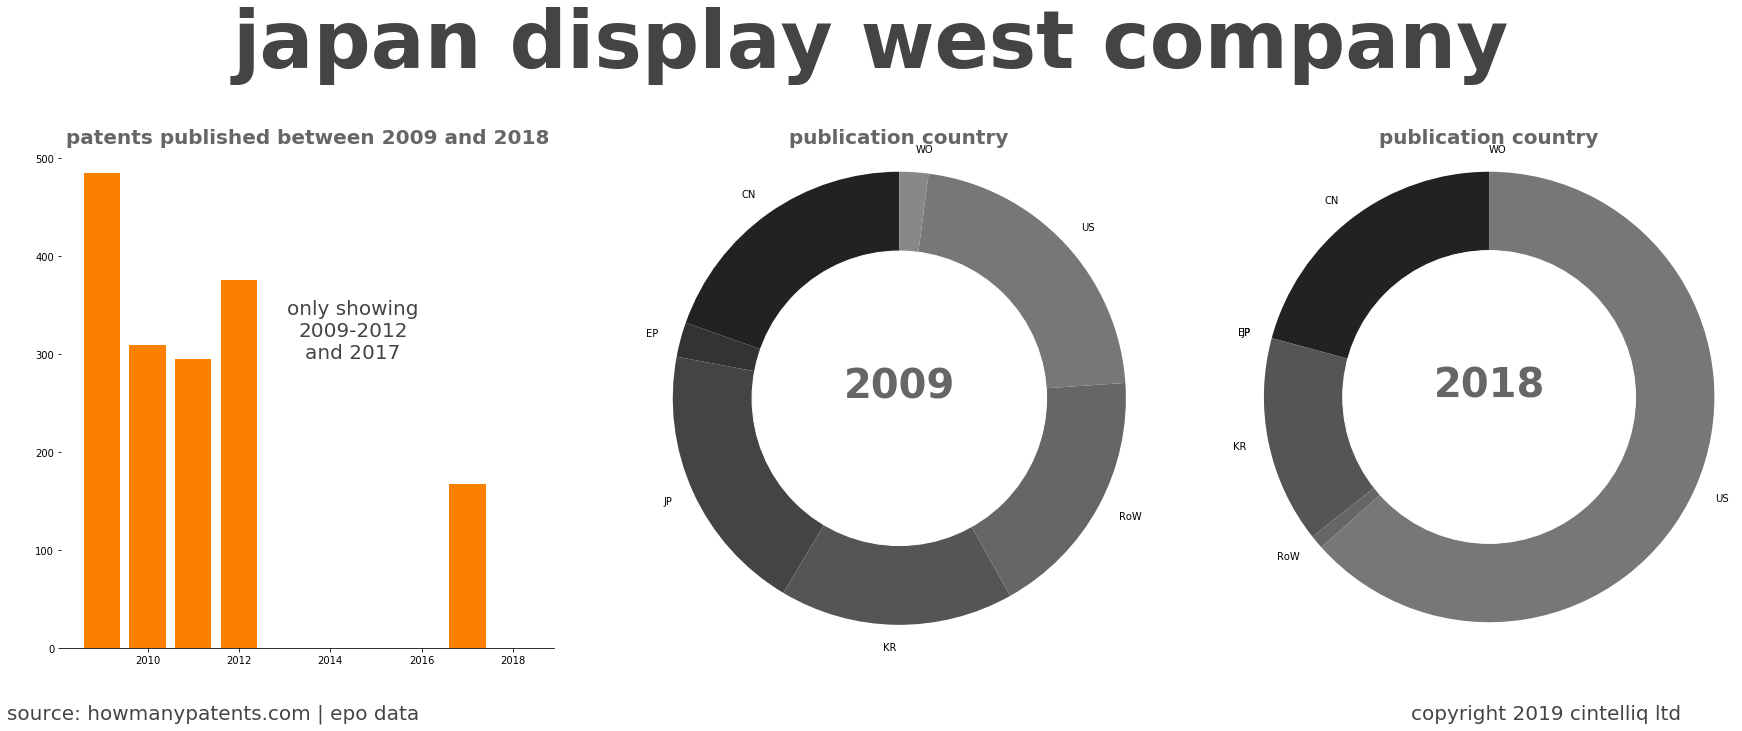 summary of patents for Japan Display West Company